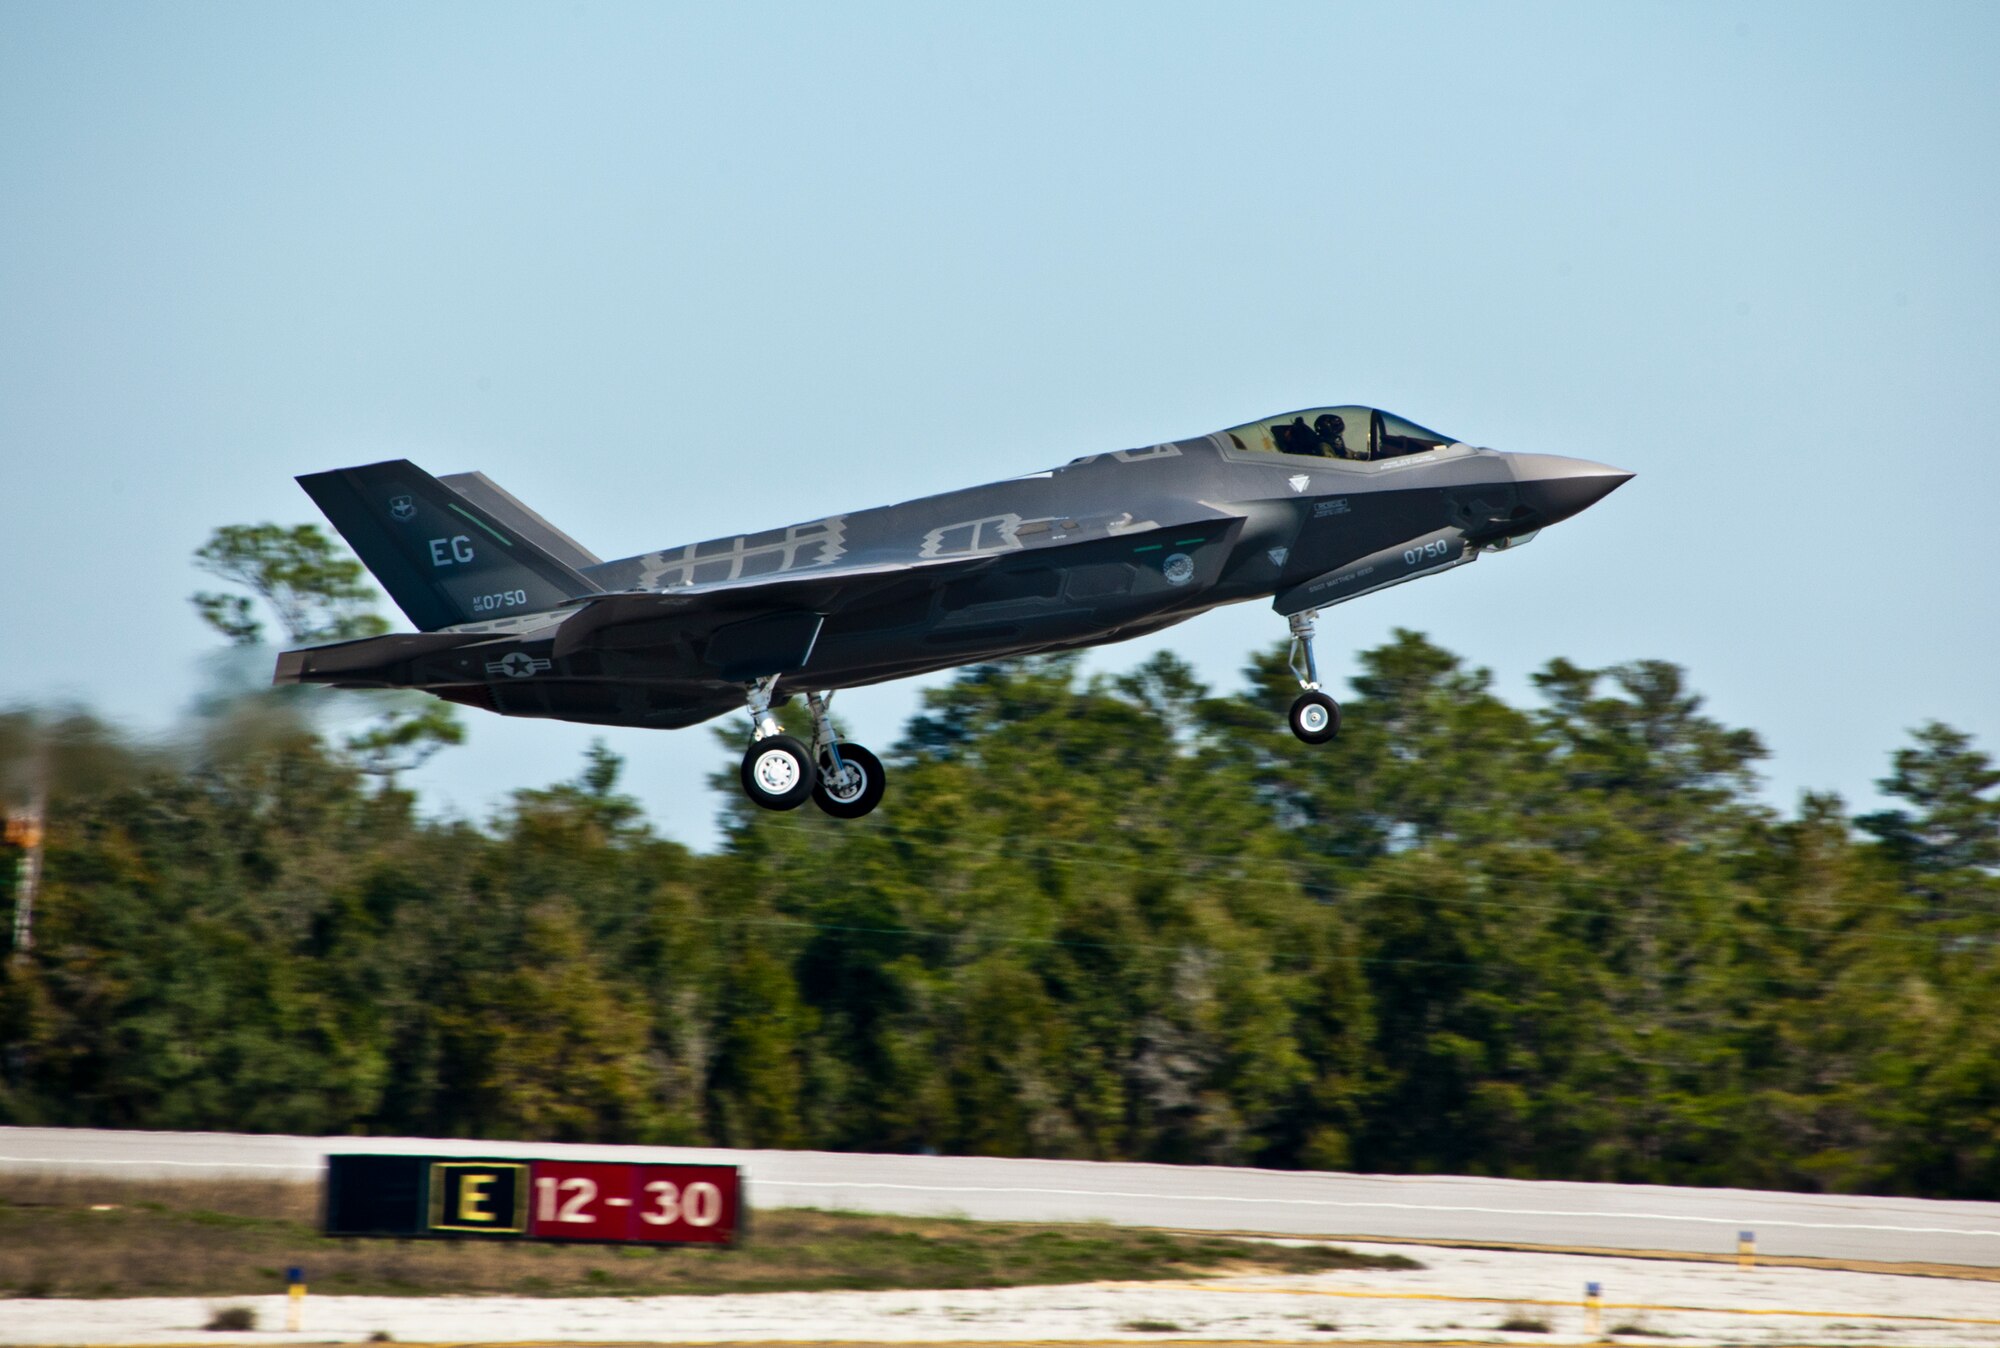 The F-35A Lightning II joint strike fighter lifts off for its first training sortie March 6 at Eglin Air Force Base, Fla.  It’s the first flight of any 33rd Fighter Wing F-35 since their arrival to the base.  (U.S. Air Force photo/Samuel King Jr.)